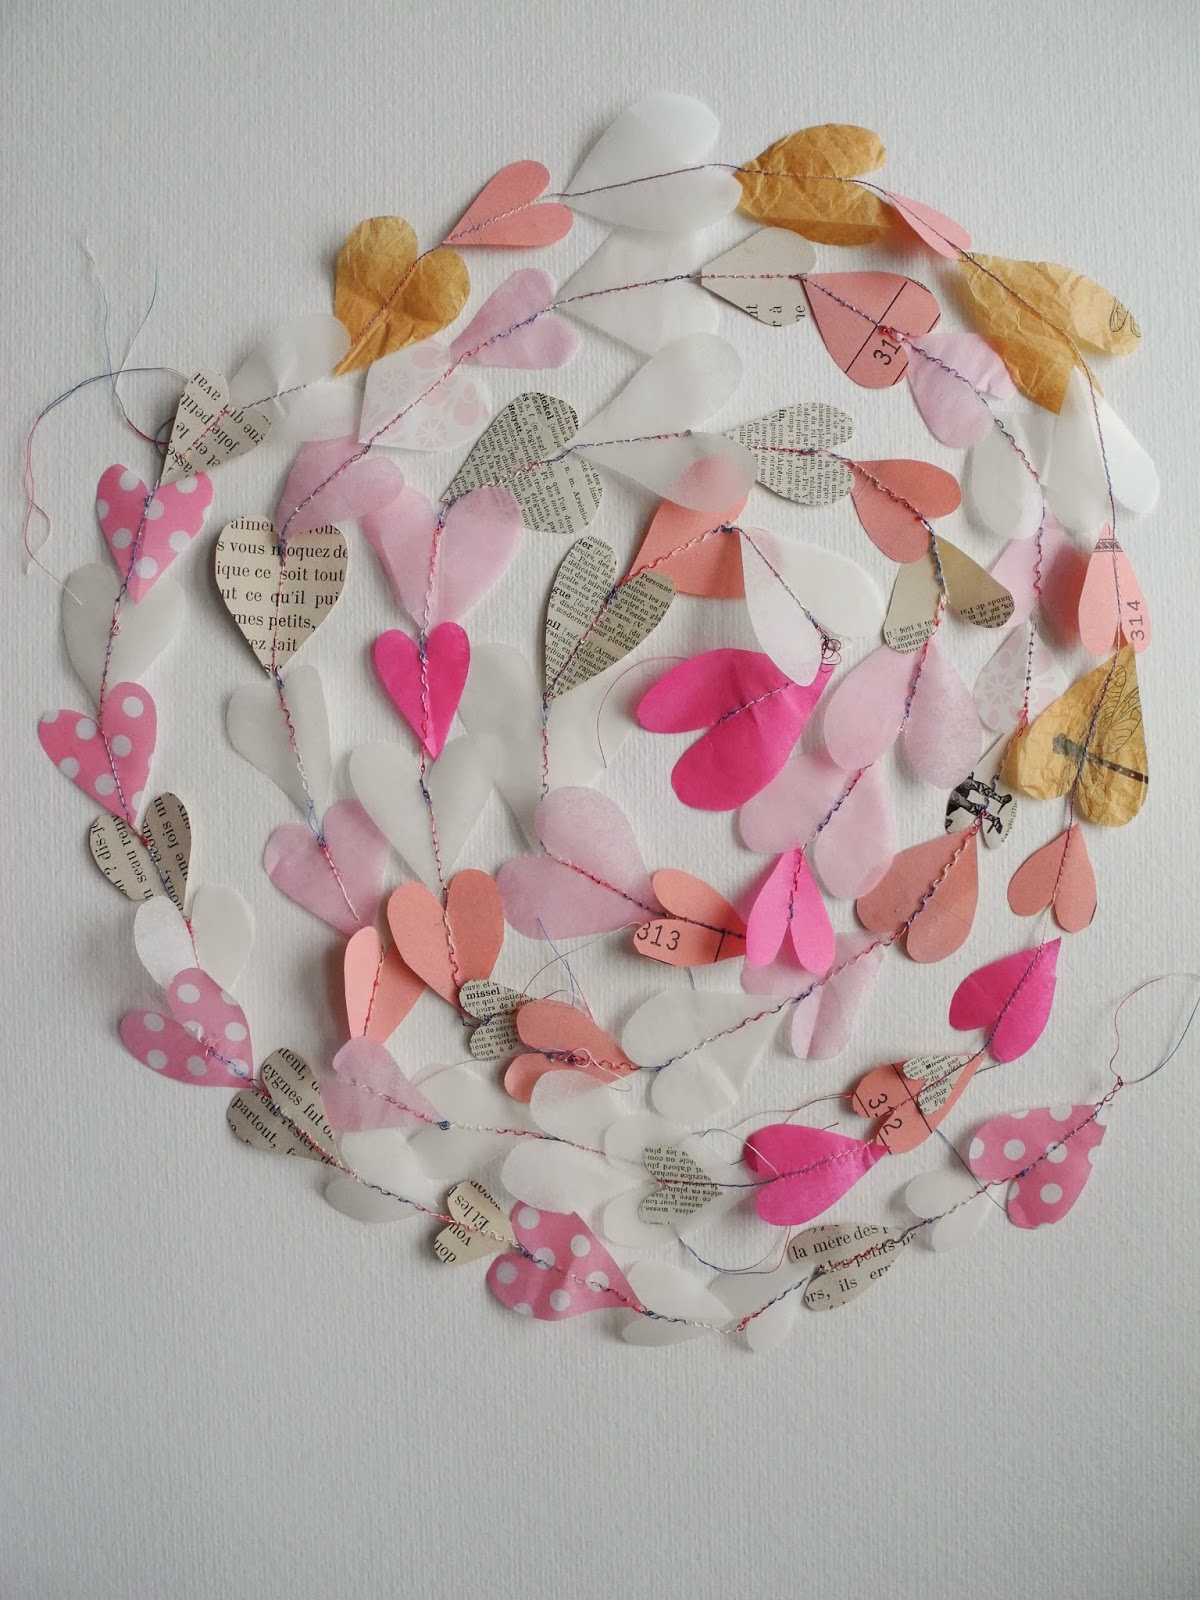 One Bunting Away: #12 - Hearts on a String